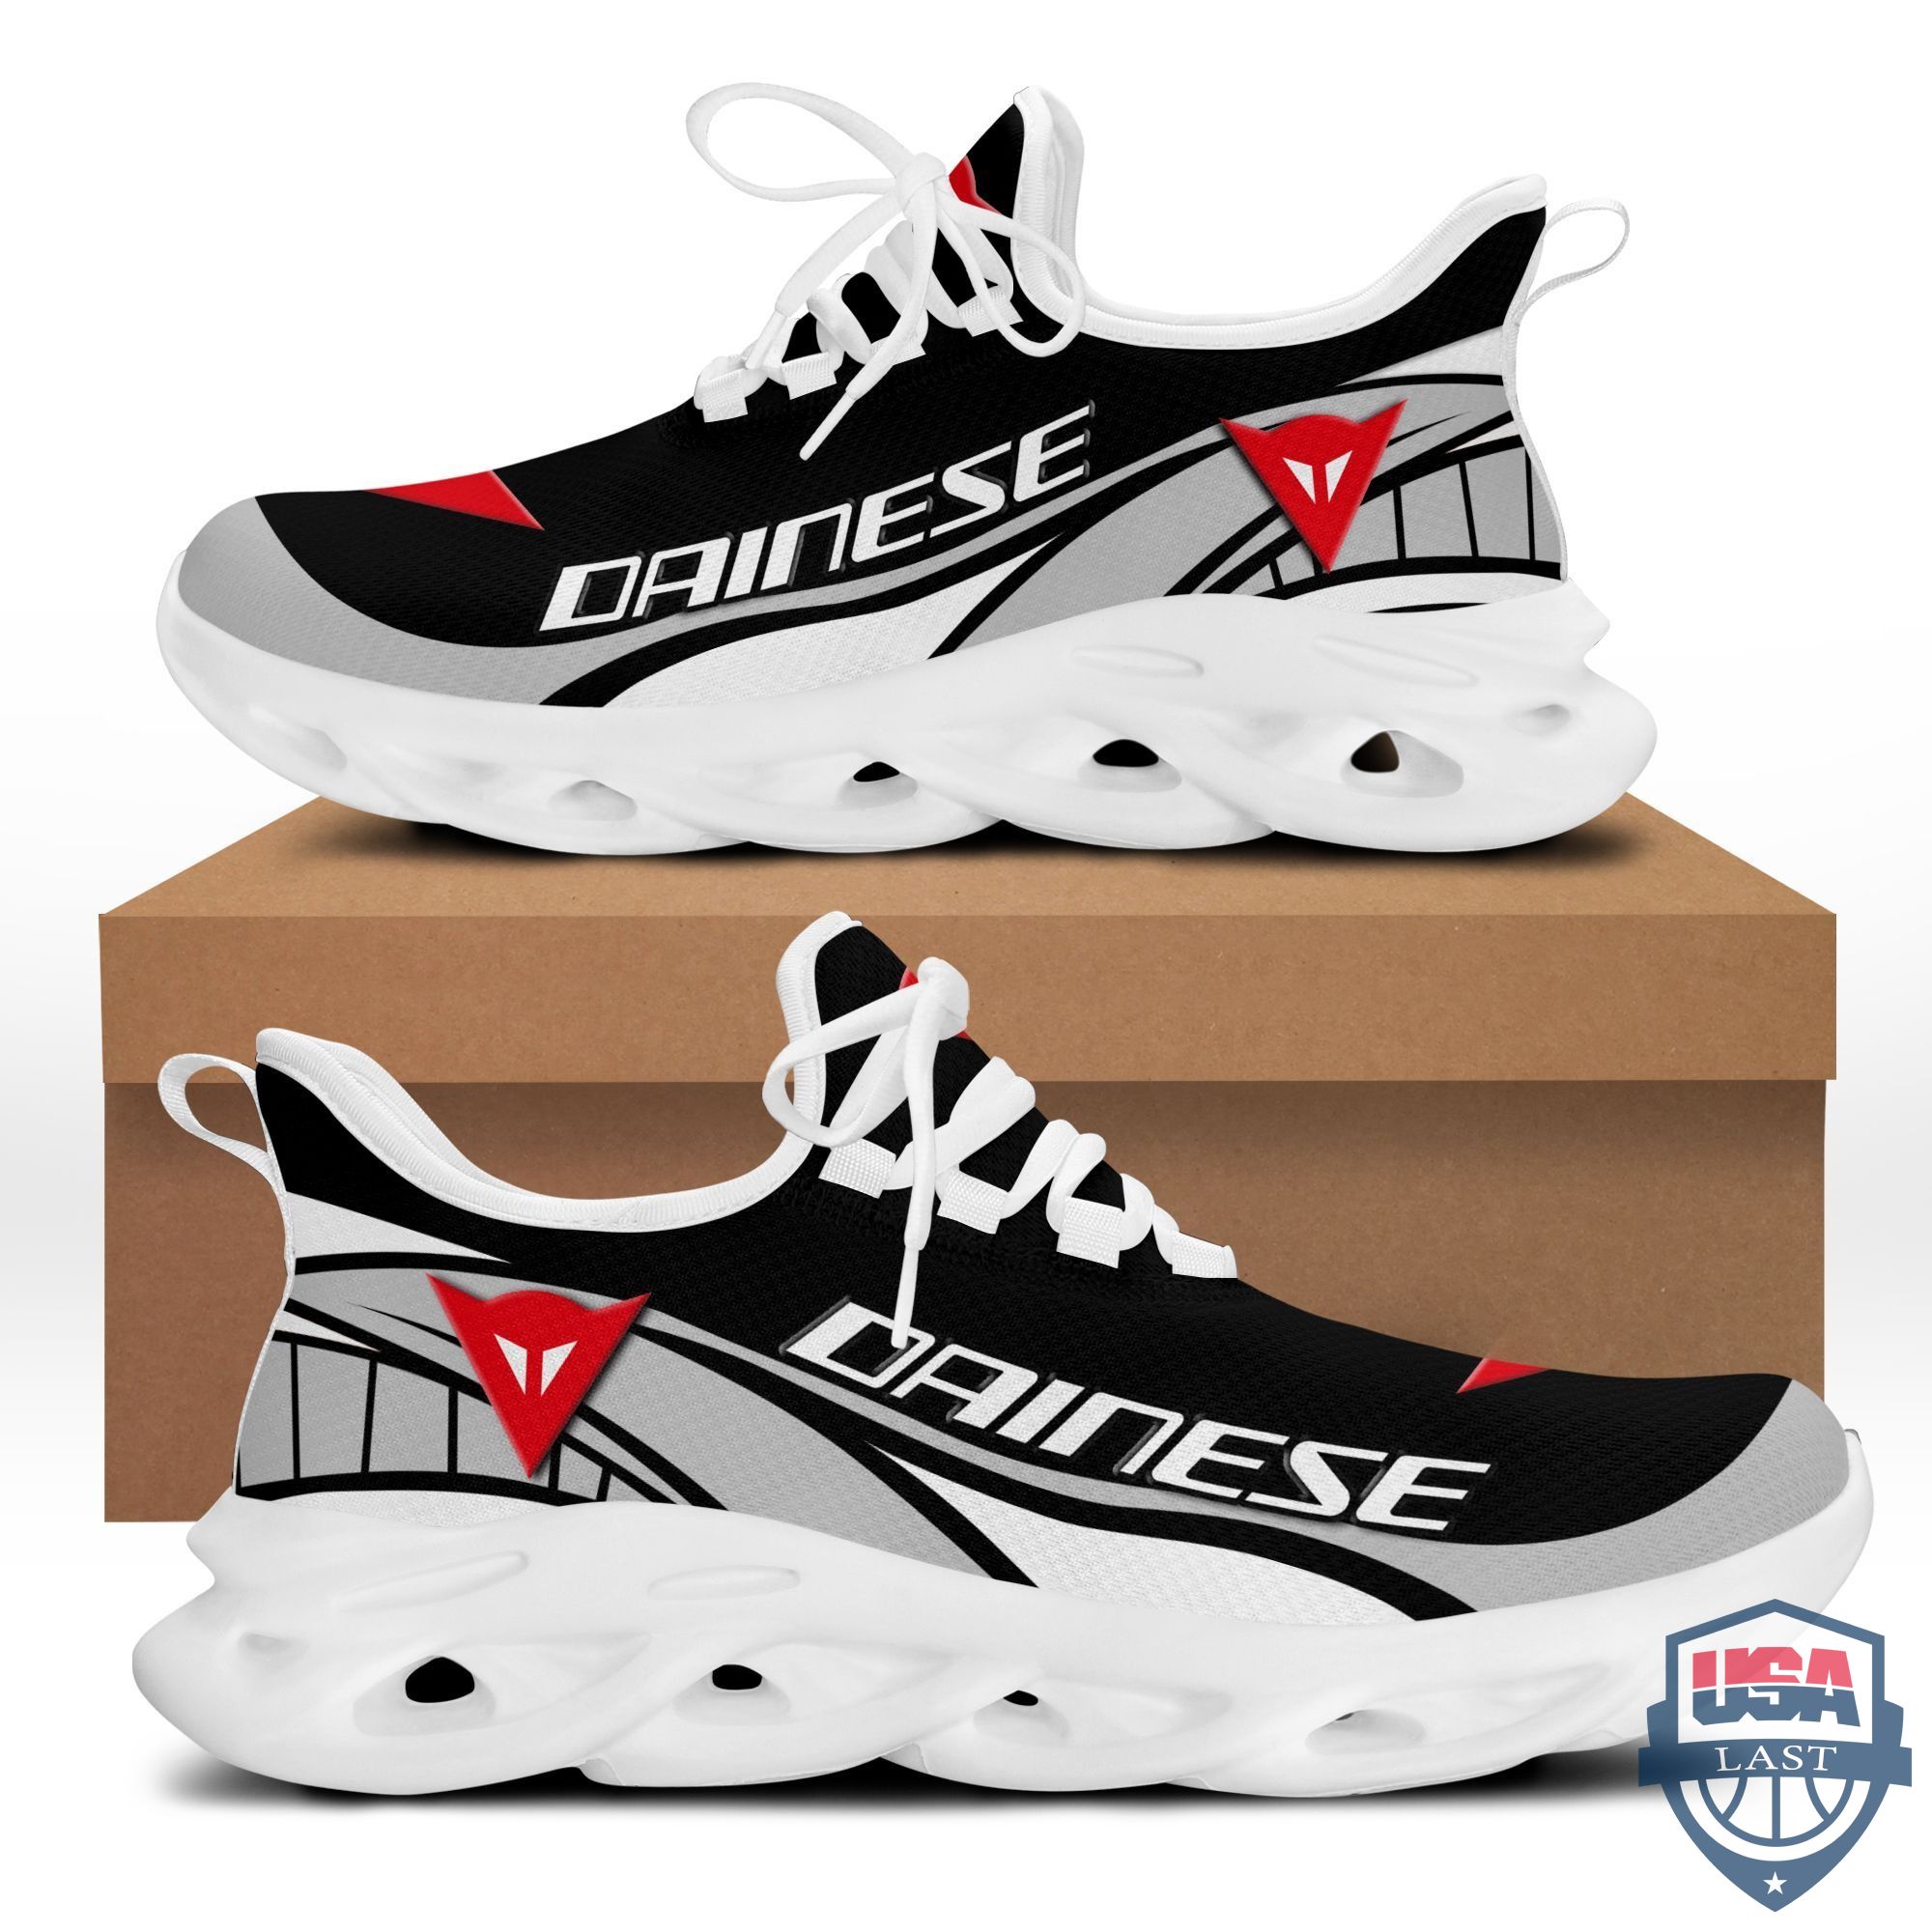 Dainese Clunky Max Soul Sneaker White Version